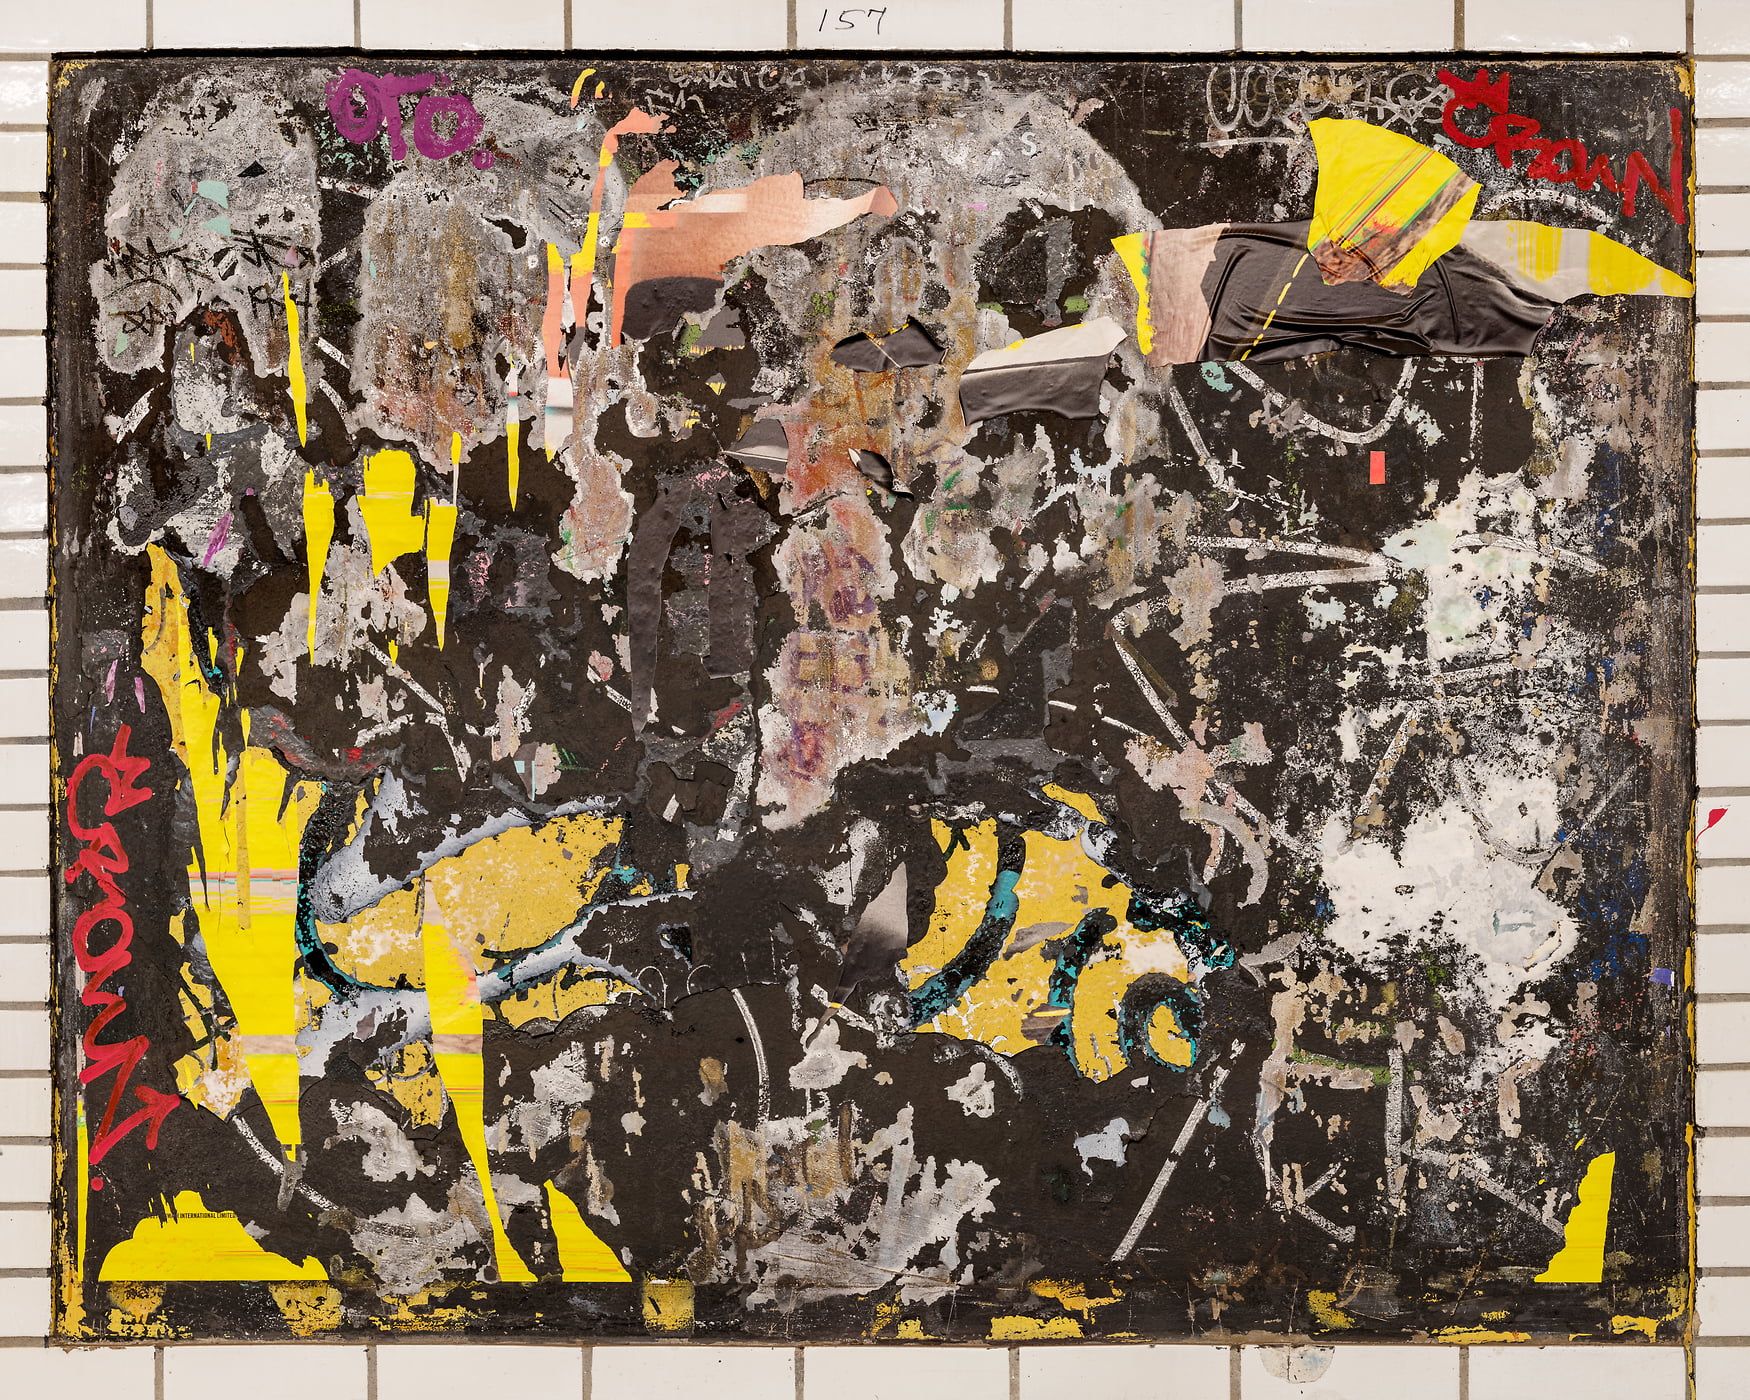 395 megapixels! A very high resolution, large-format VAST photo print of a black & yellow abstract art; photograph created by Barton Lewis in 170th St. subway stn., Bronx, NY